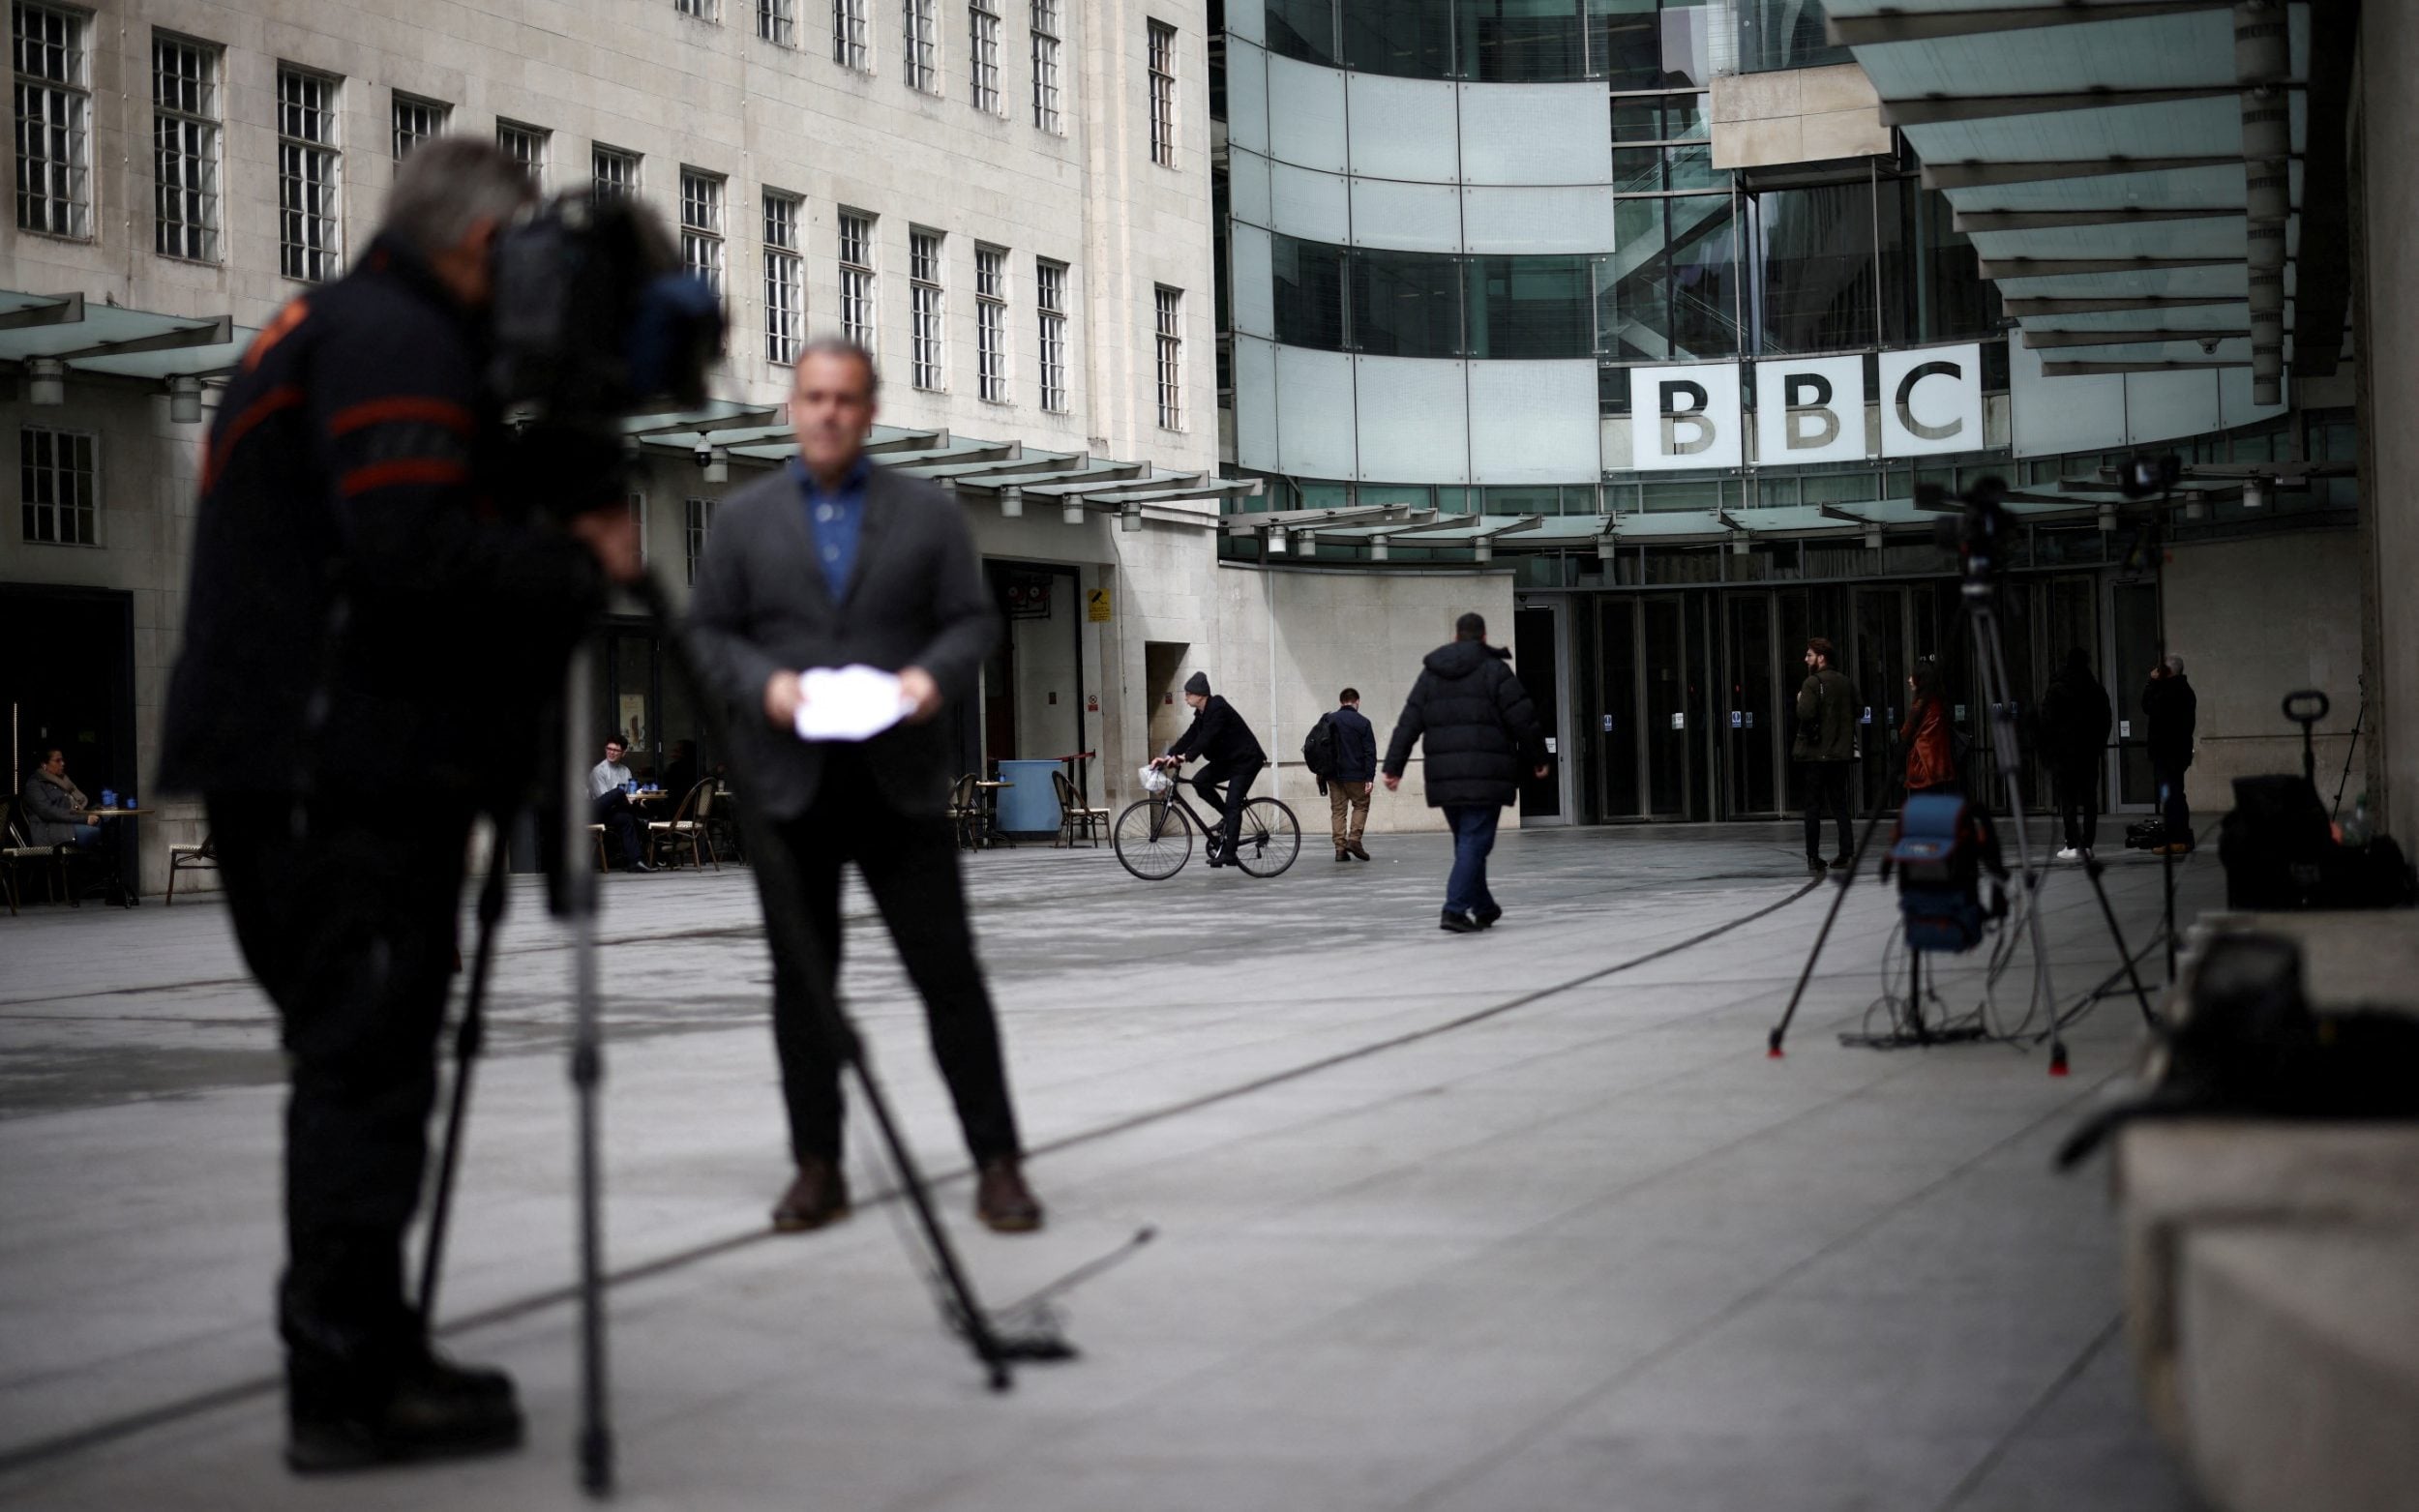 93pc of BBC journalists have no confidence in senior leadership team